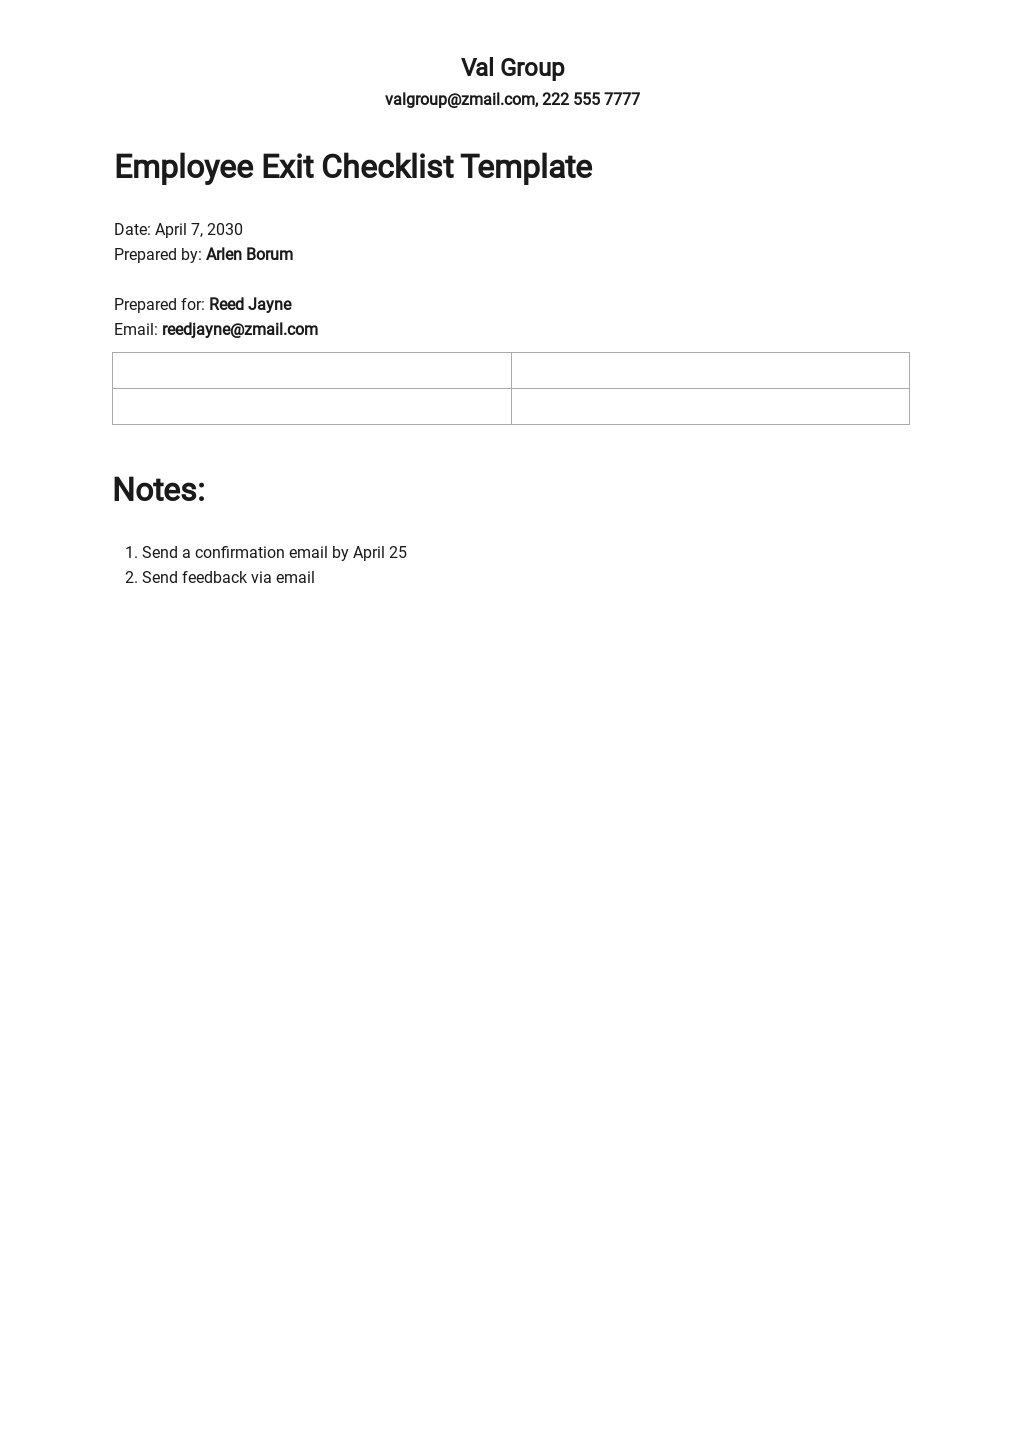 Employee Exit Checklist Template Google Docs Word Apple Pages